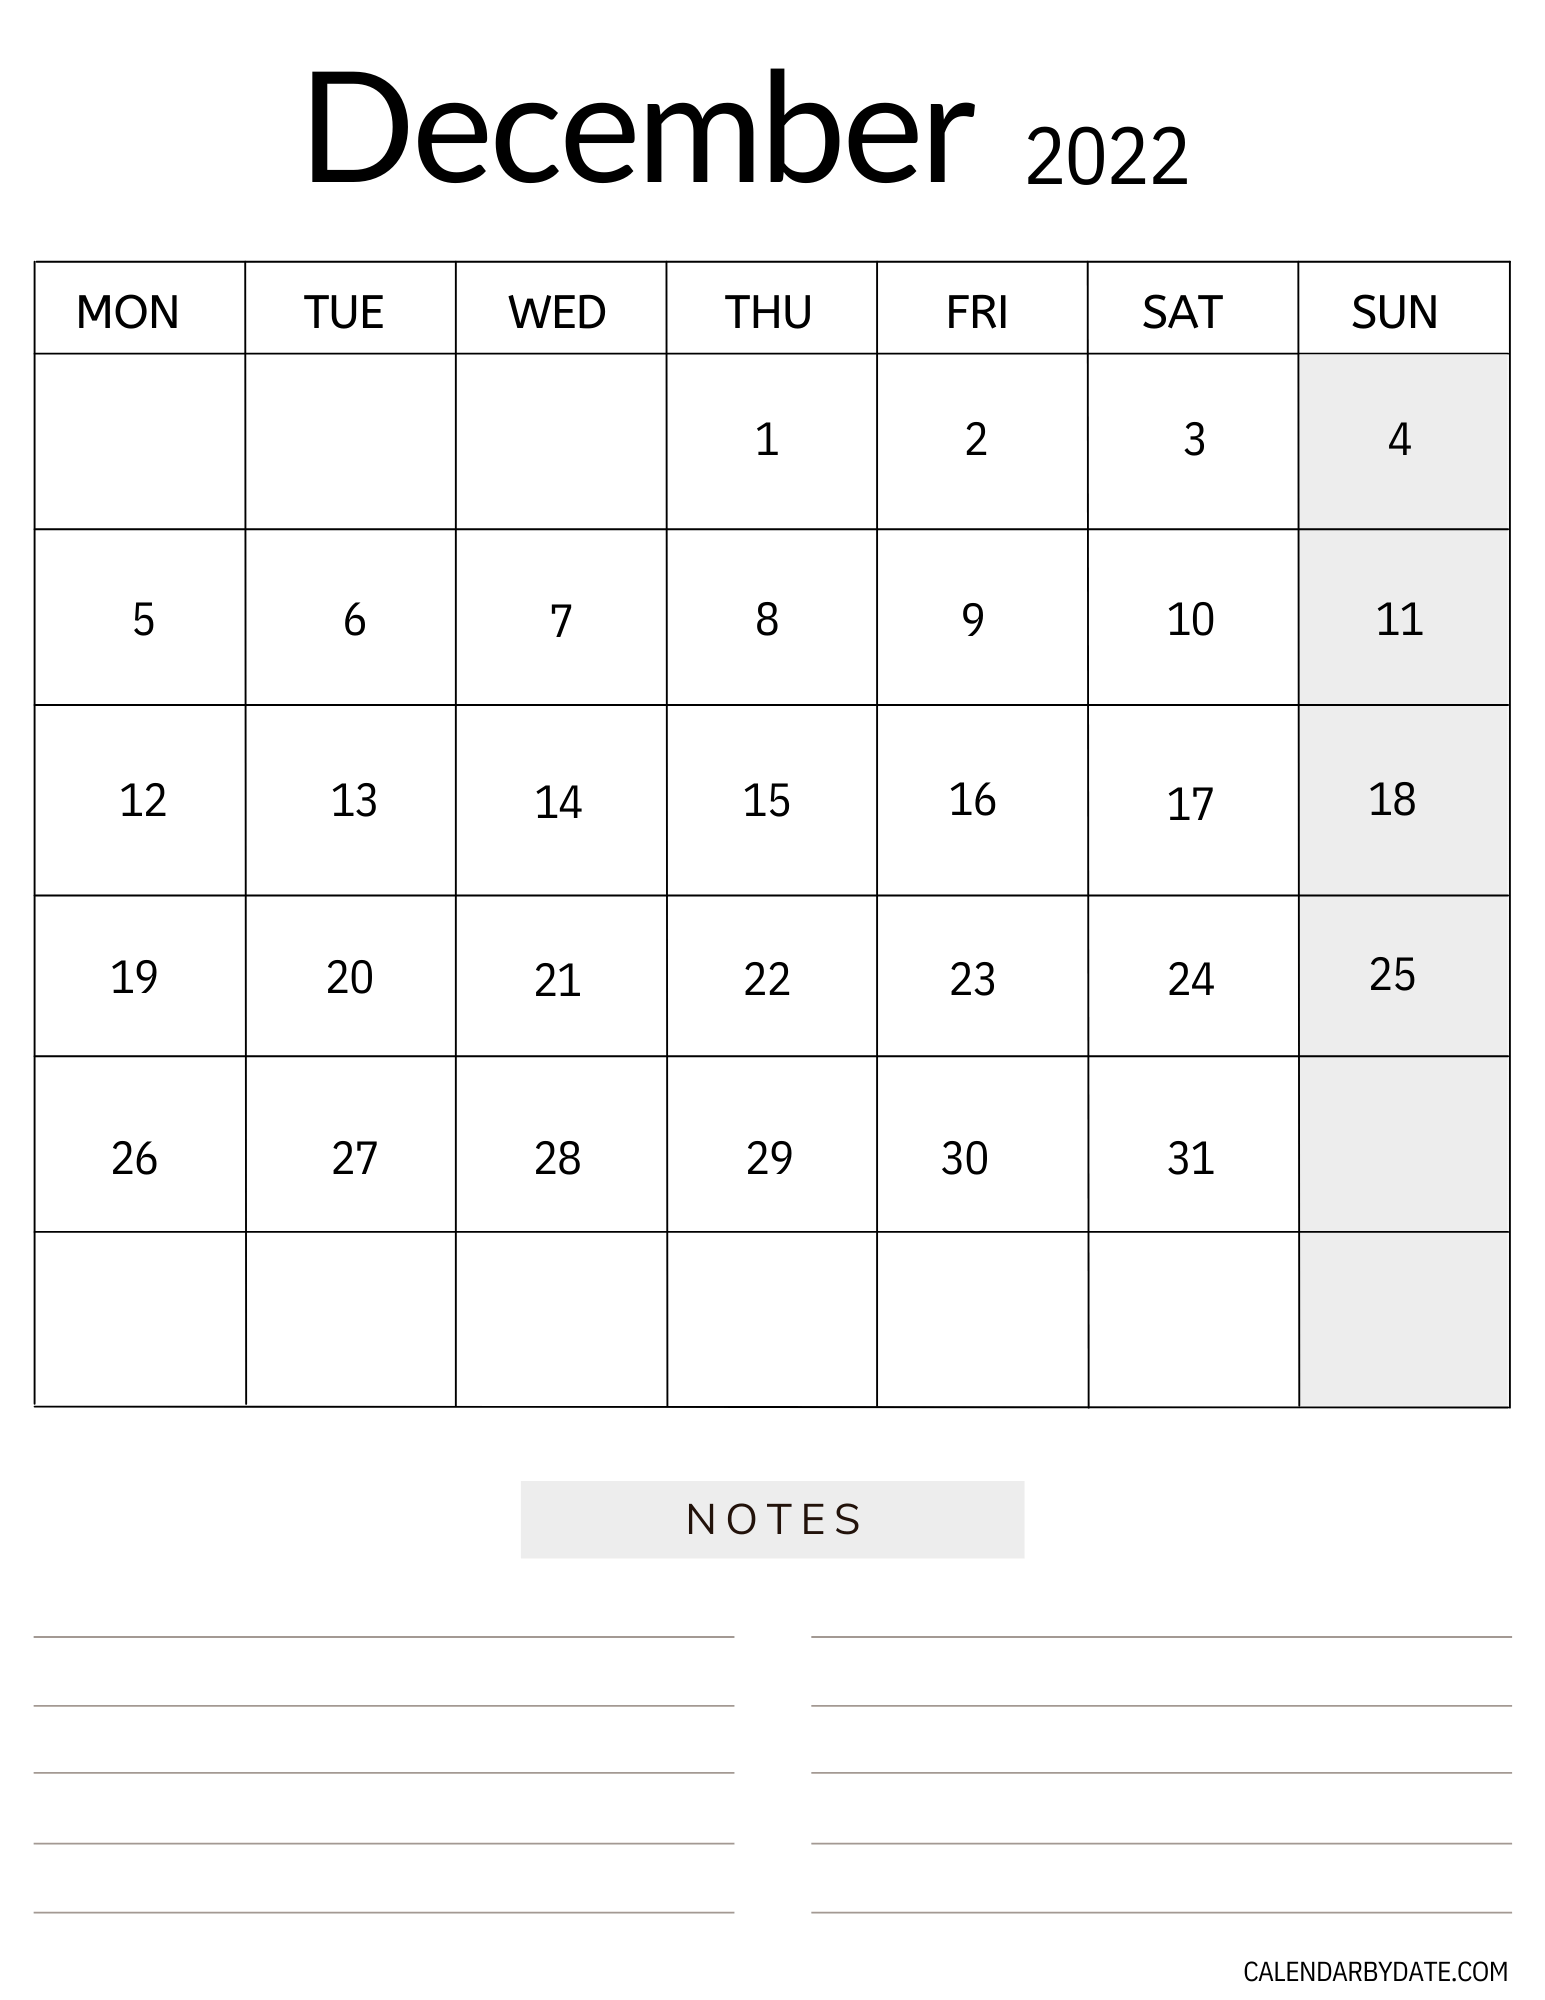 December 2022 monthly calendar with month name and year at the top with calendar grid with month dates. At the bottom space is provided to write notes and tasks.